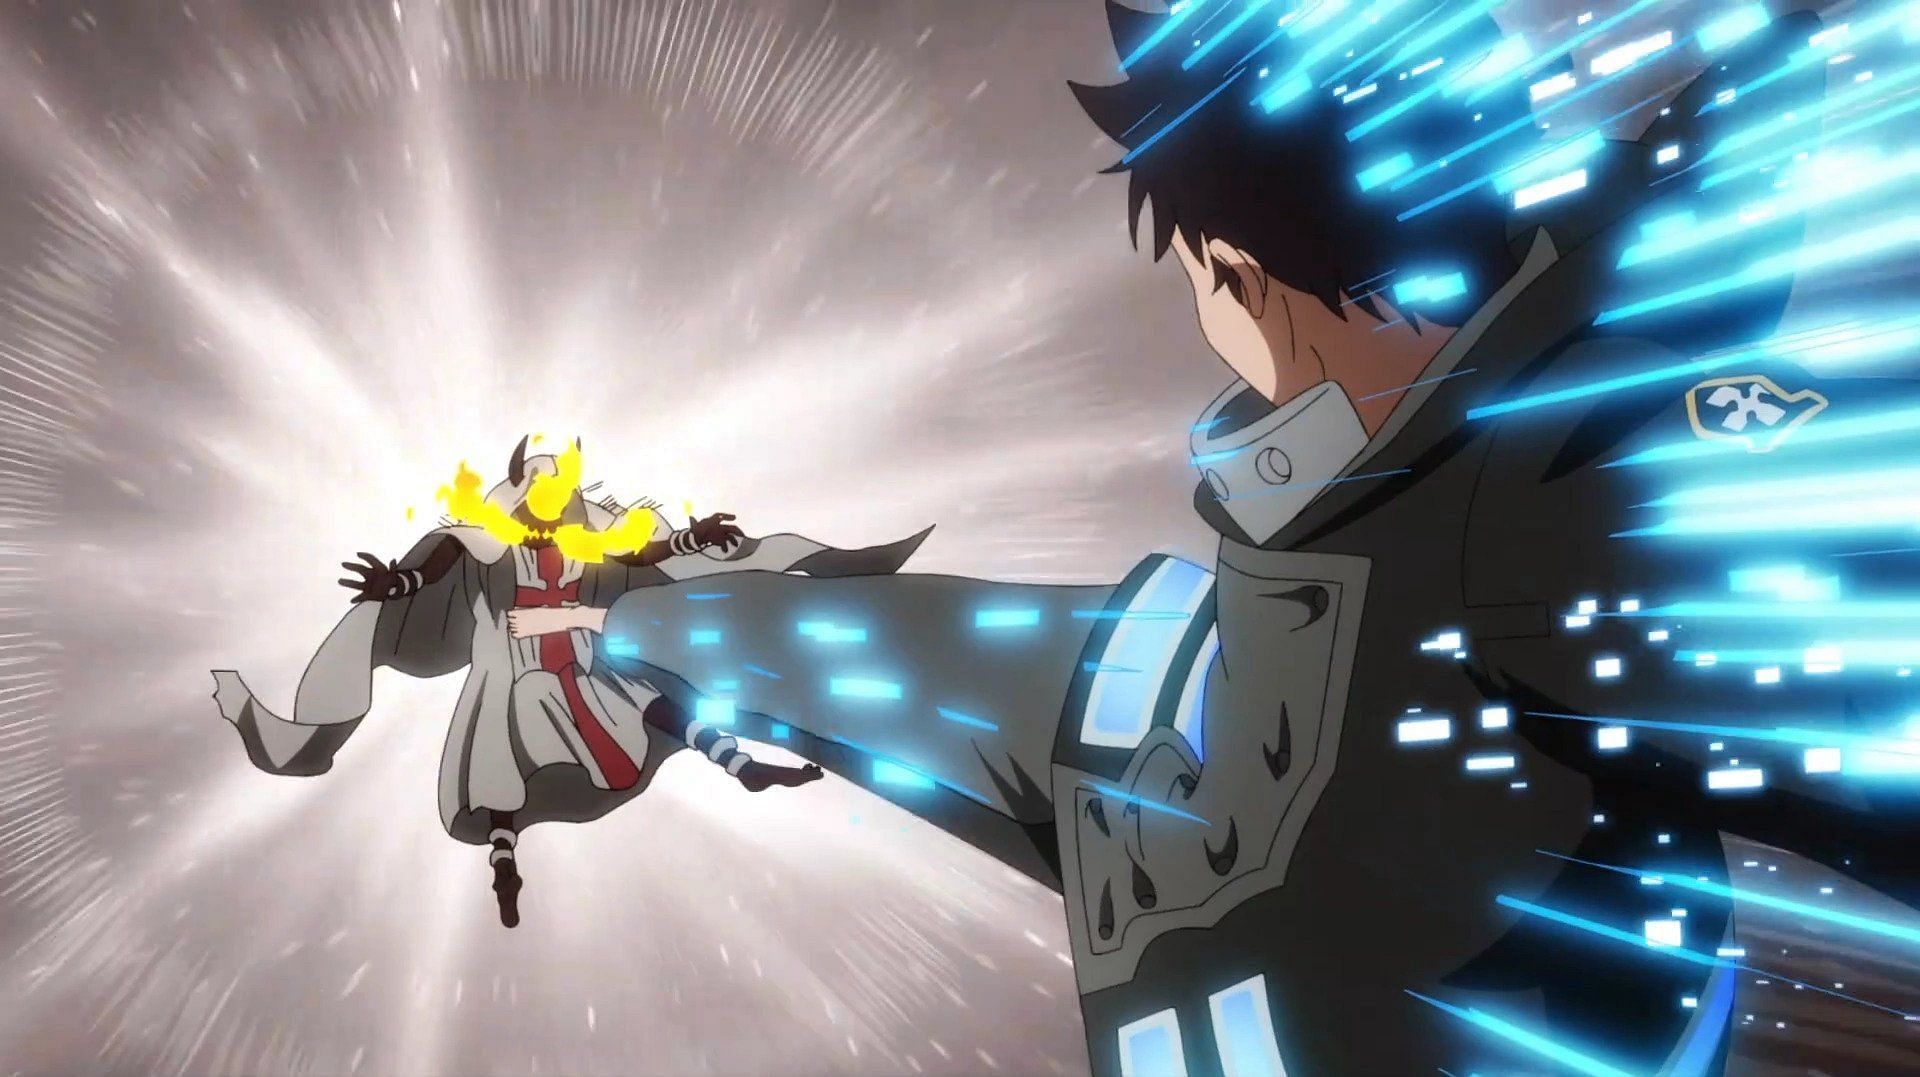 Fire Force Online Generations: All abilities listed